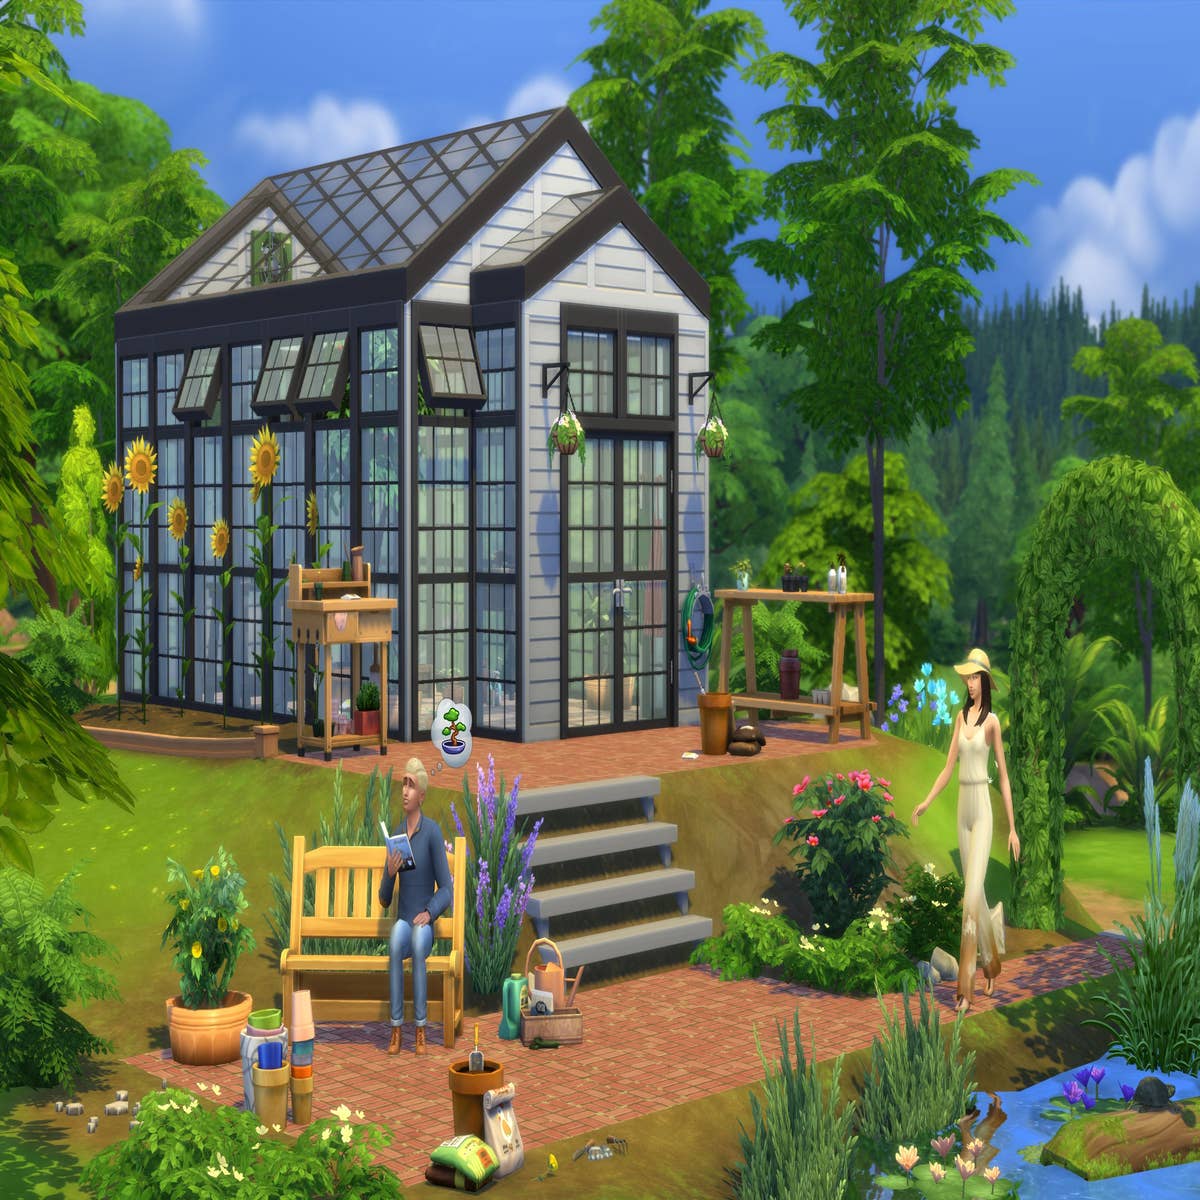 facebook sims house inspiration  Sims house, House inspiration, Sims